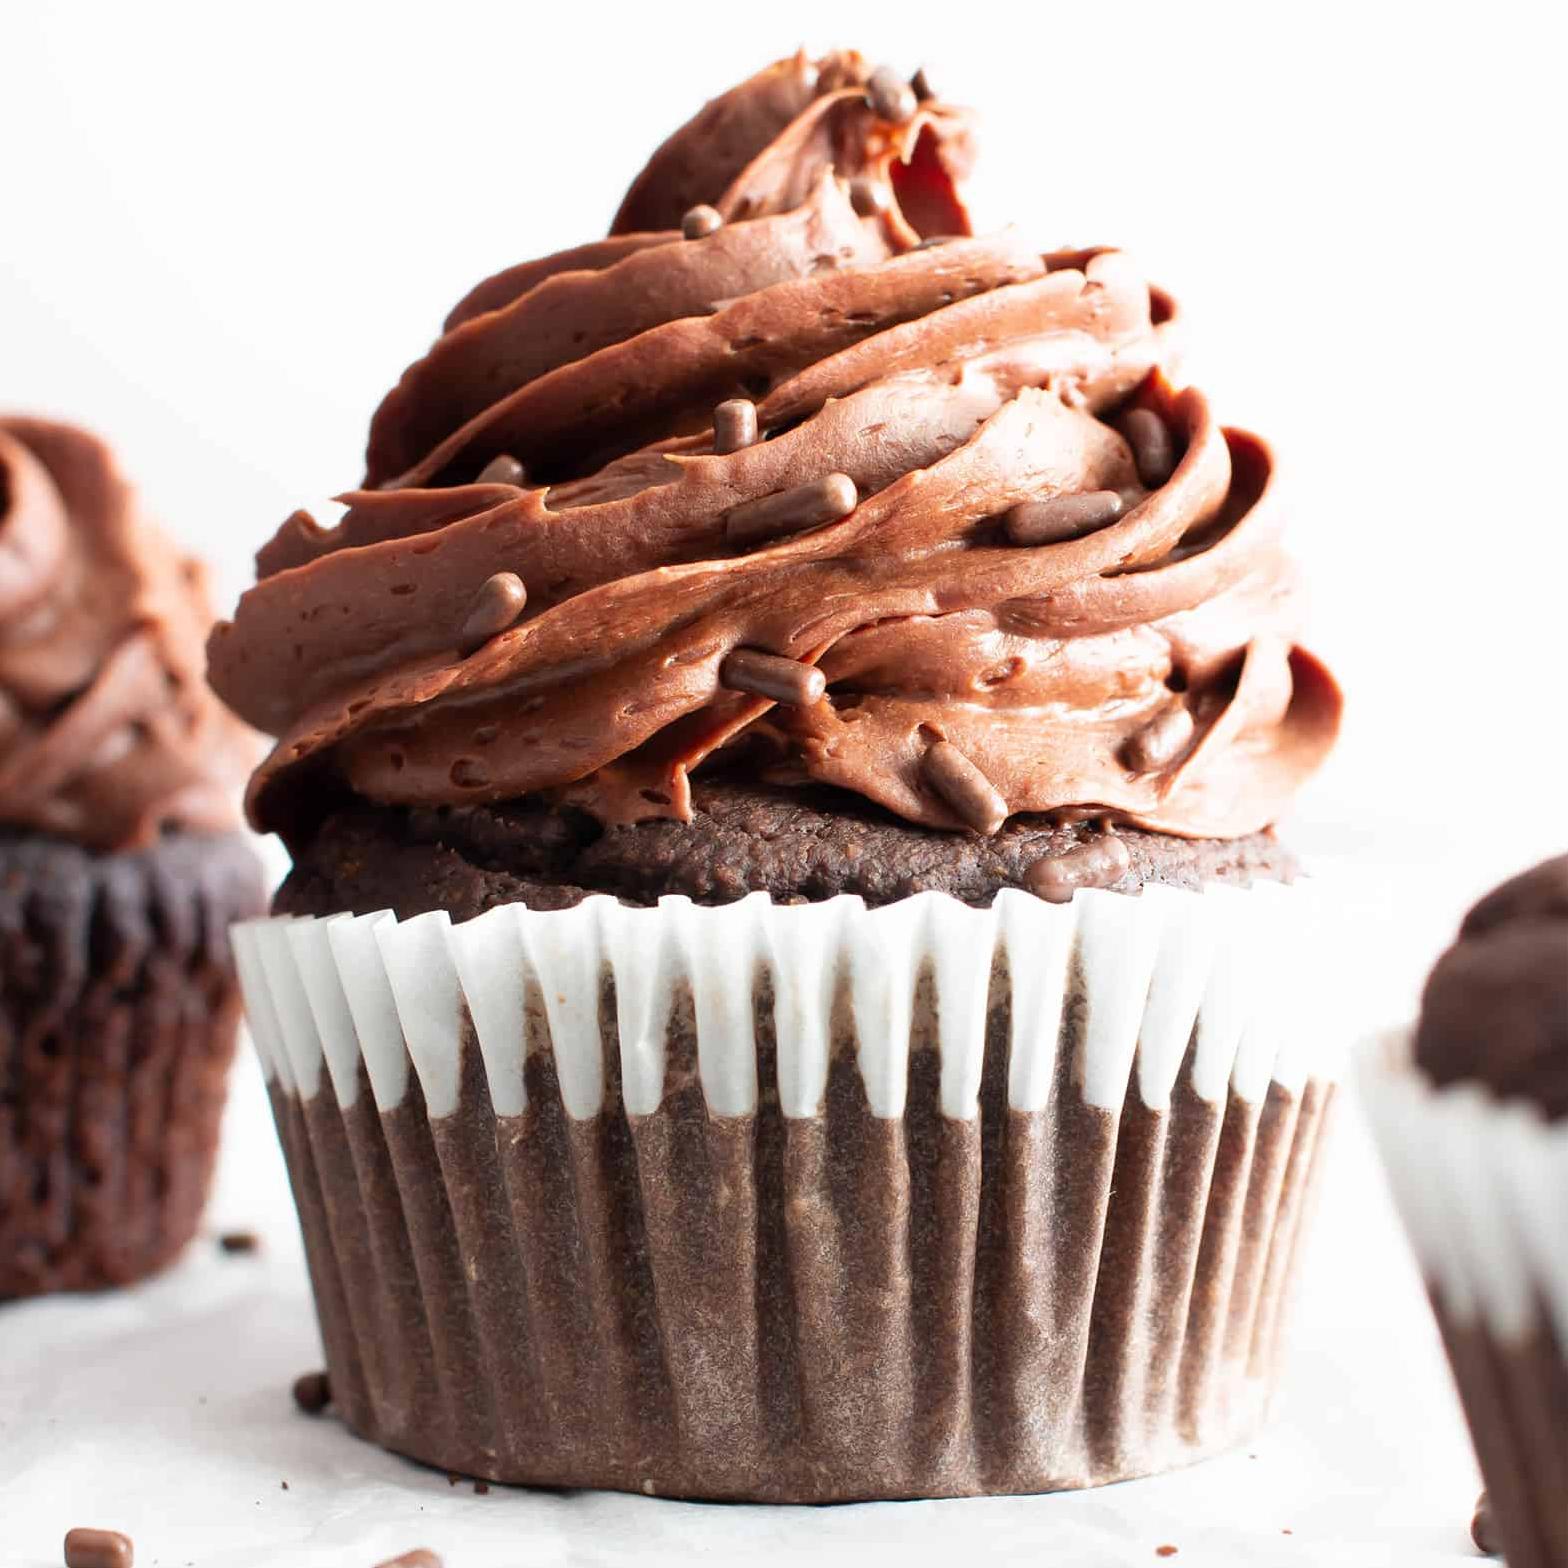  These cupcakes/muffins are like a warm hug for your taste buds.